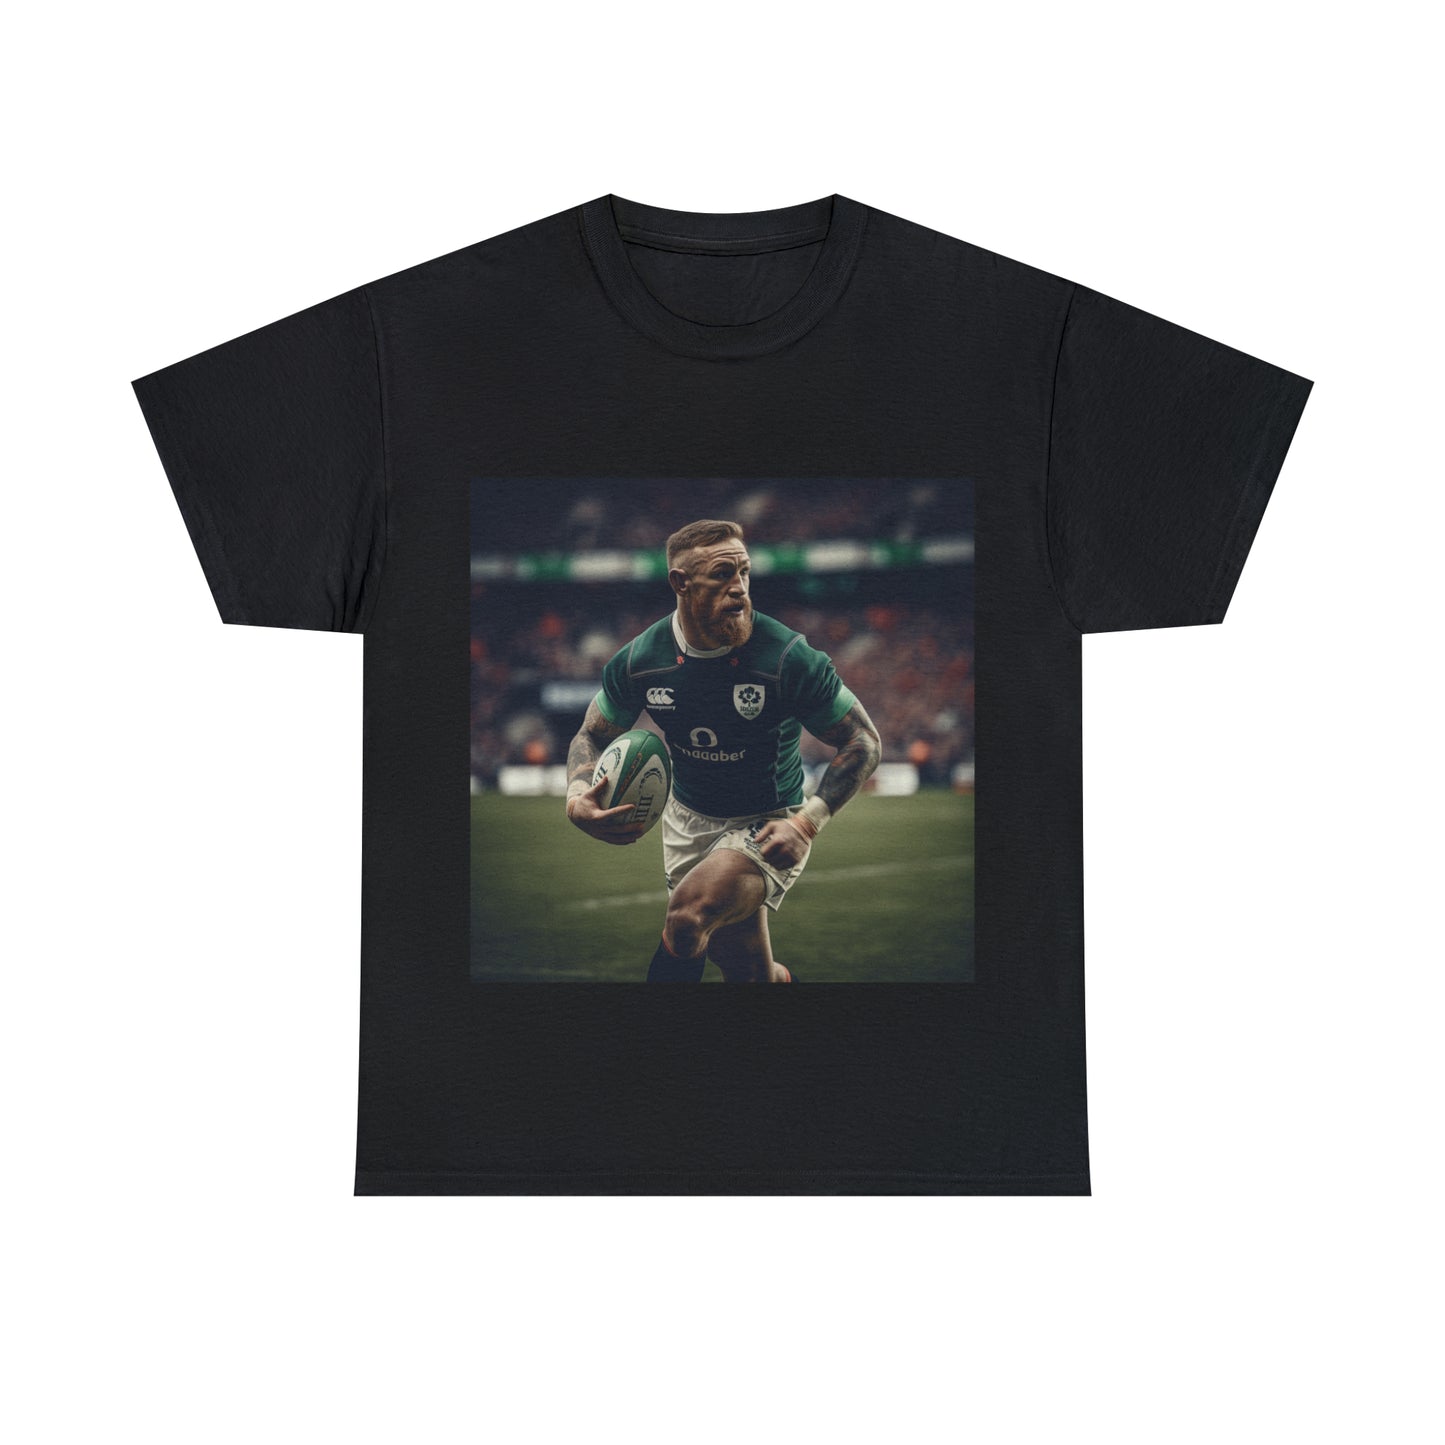 Conor Rugby - dark shirts